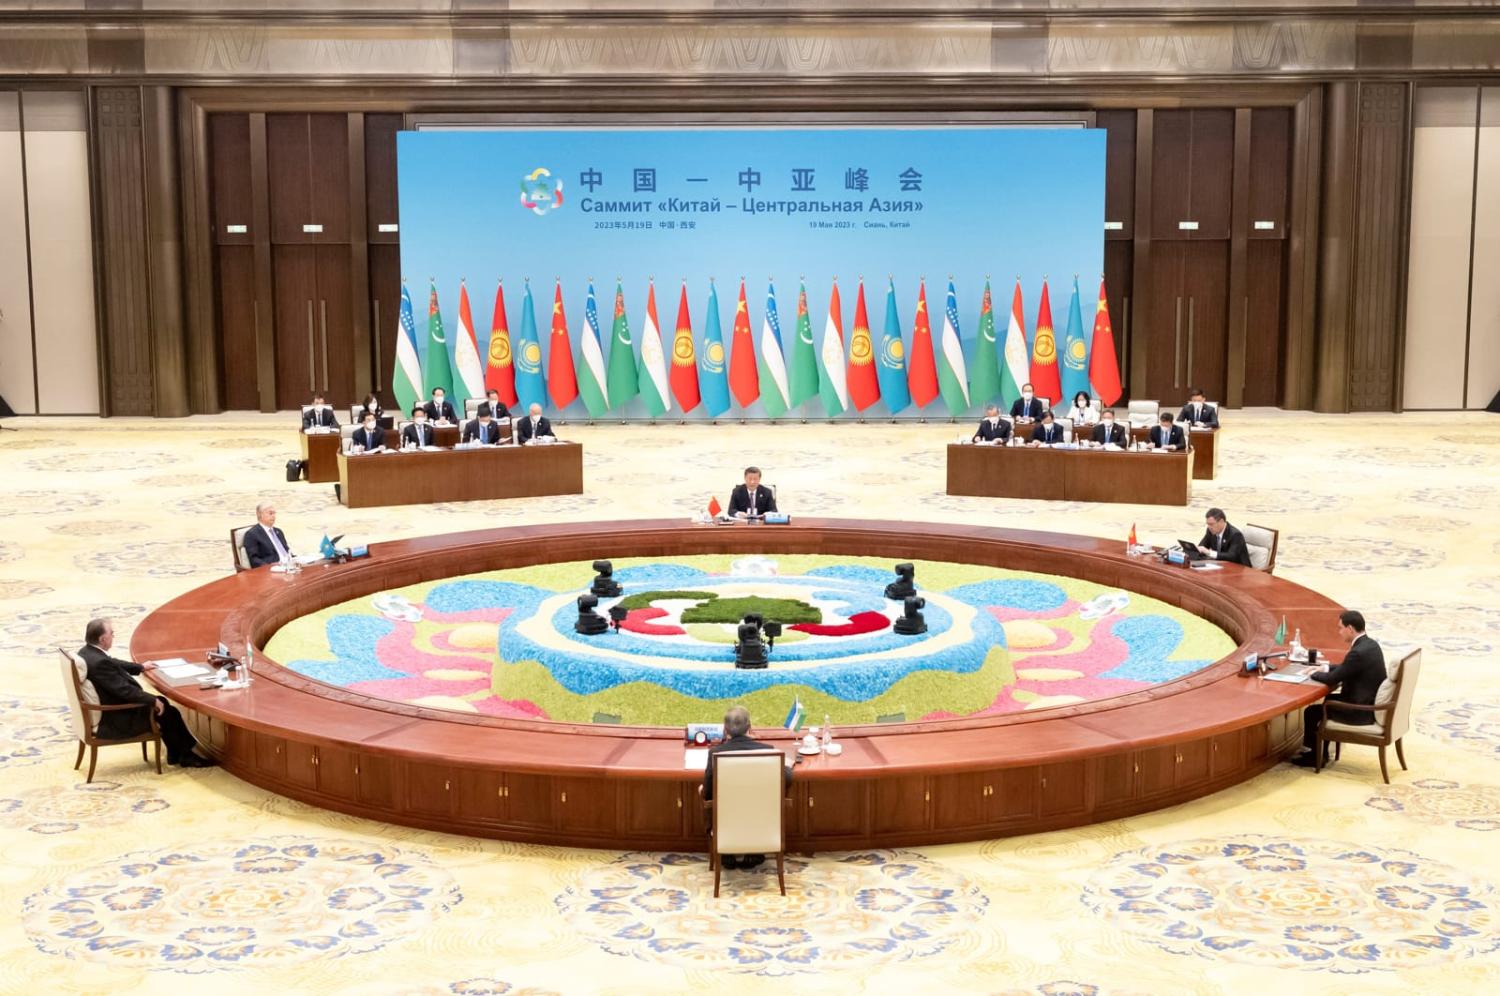 Xi Jinping chairs the first China-Central Asia Summit on 19 May attended by the leaders of Kazakhstan, Kyrgyzstan, Tajikistan, Turkmenistan and Uzbekistan (Ding Haitao/Xinhua via Getty Images)